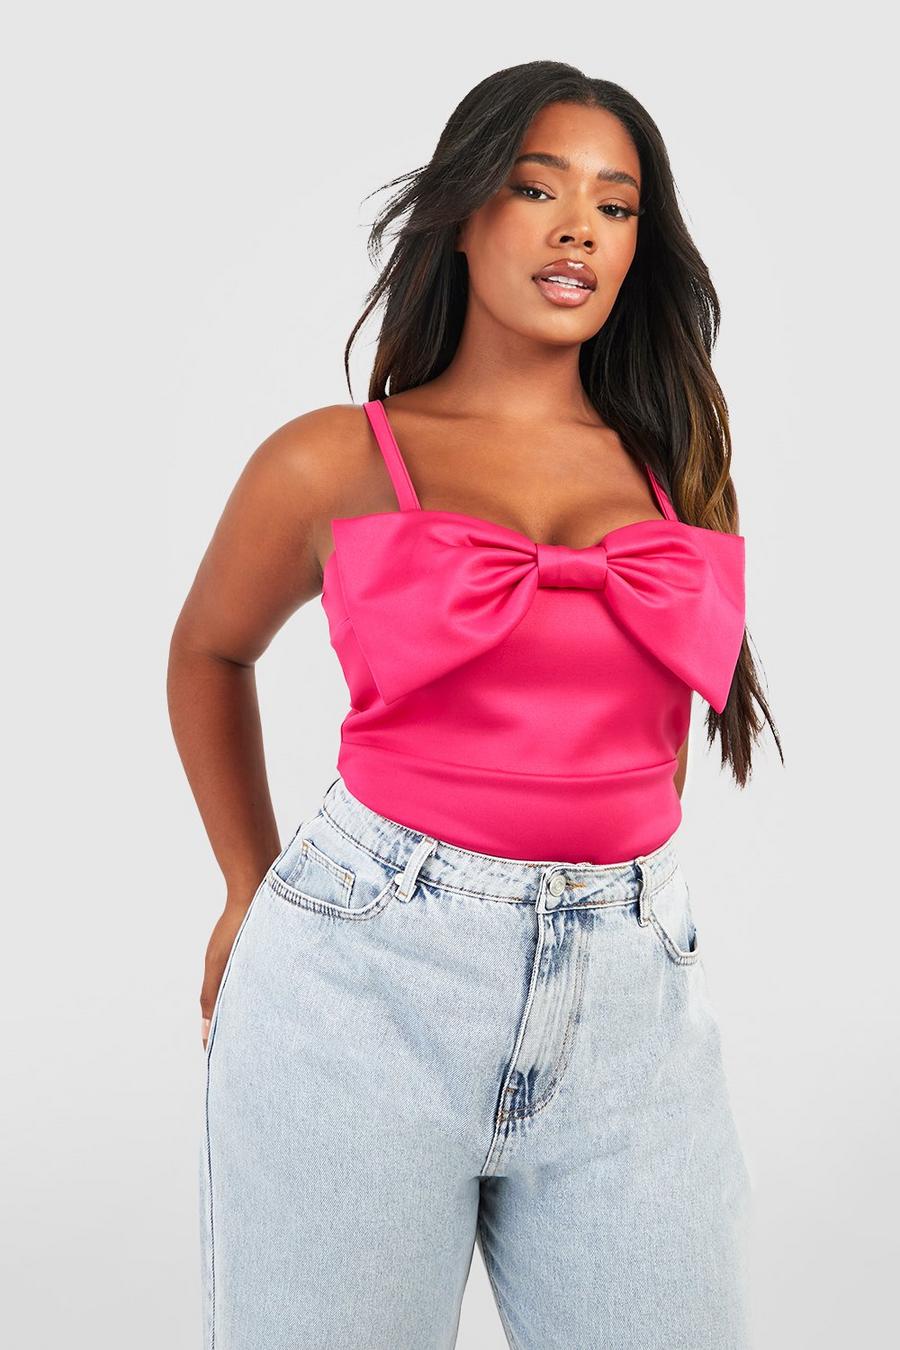 Grande taille - Body avec nœud, Hot pink